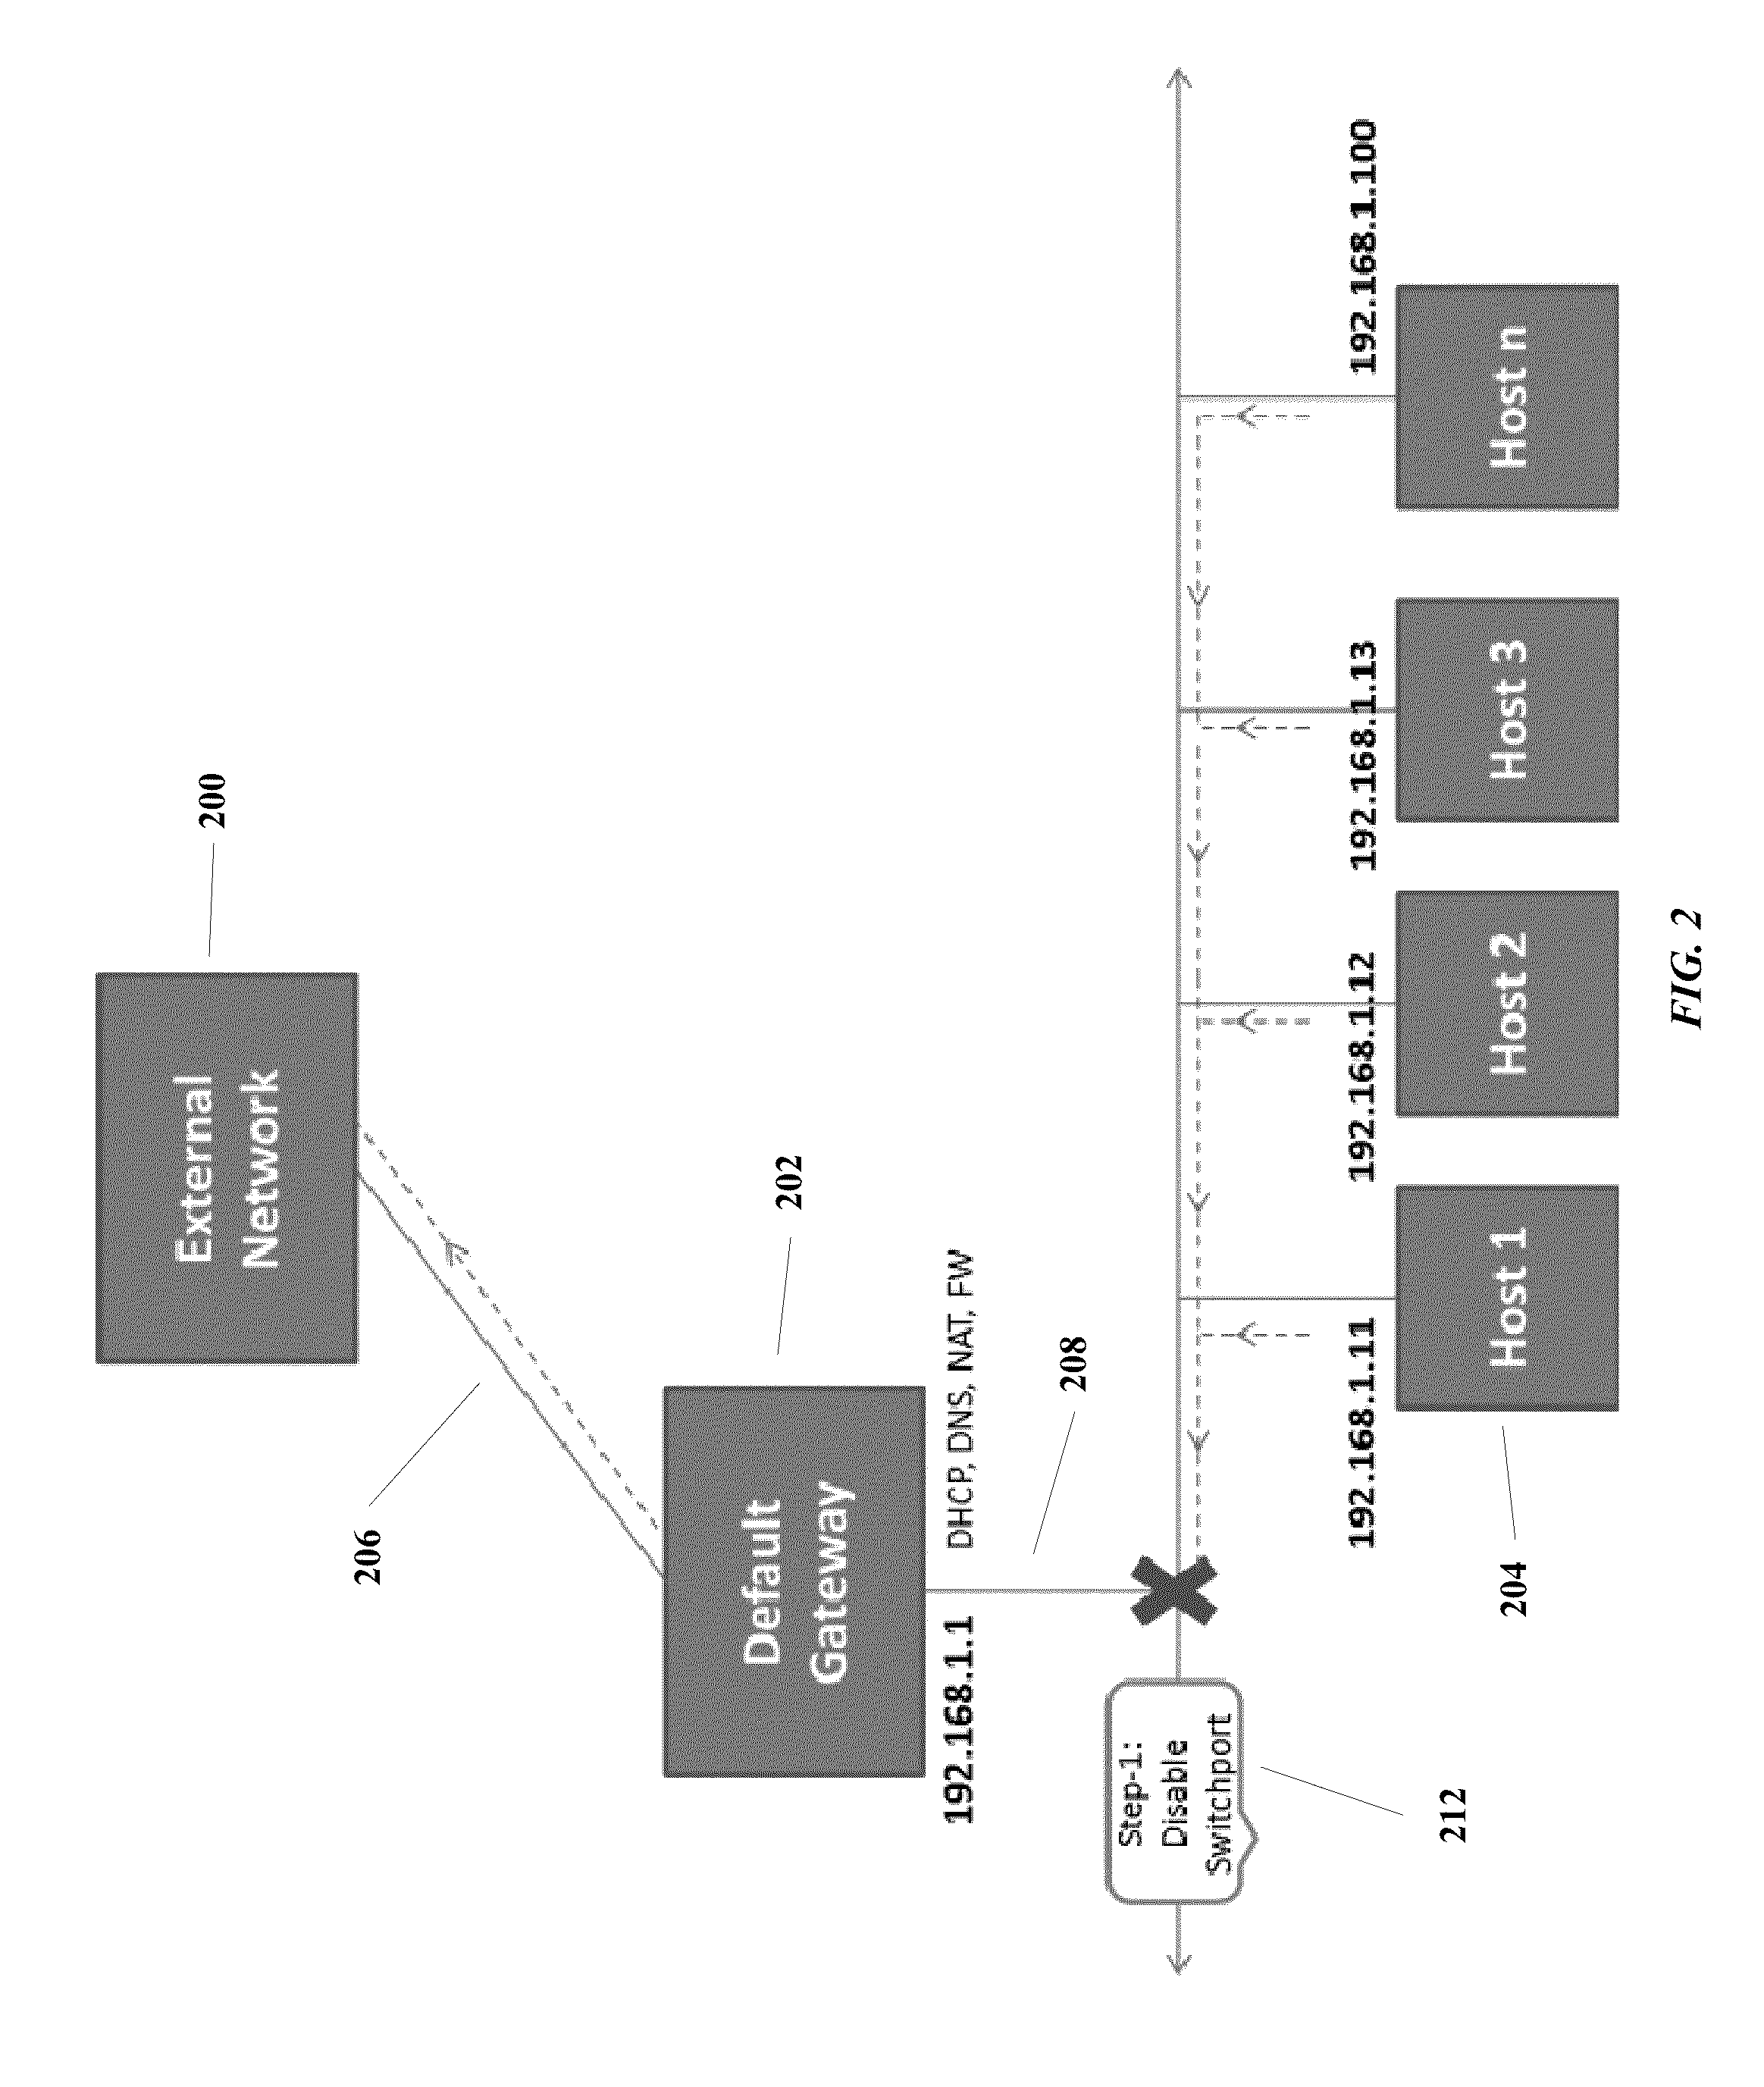 Method, apparatus and system pertaining to cloud computing